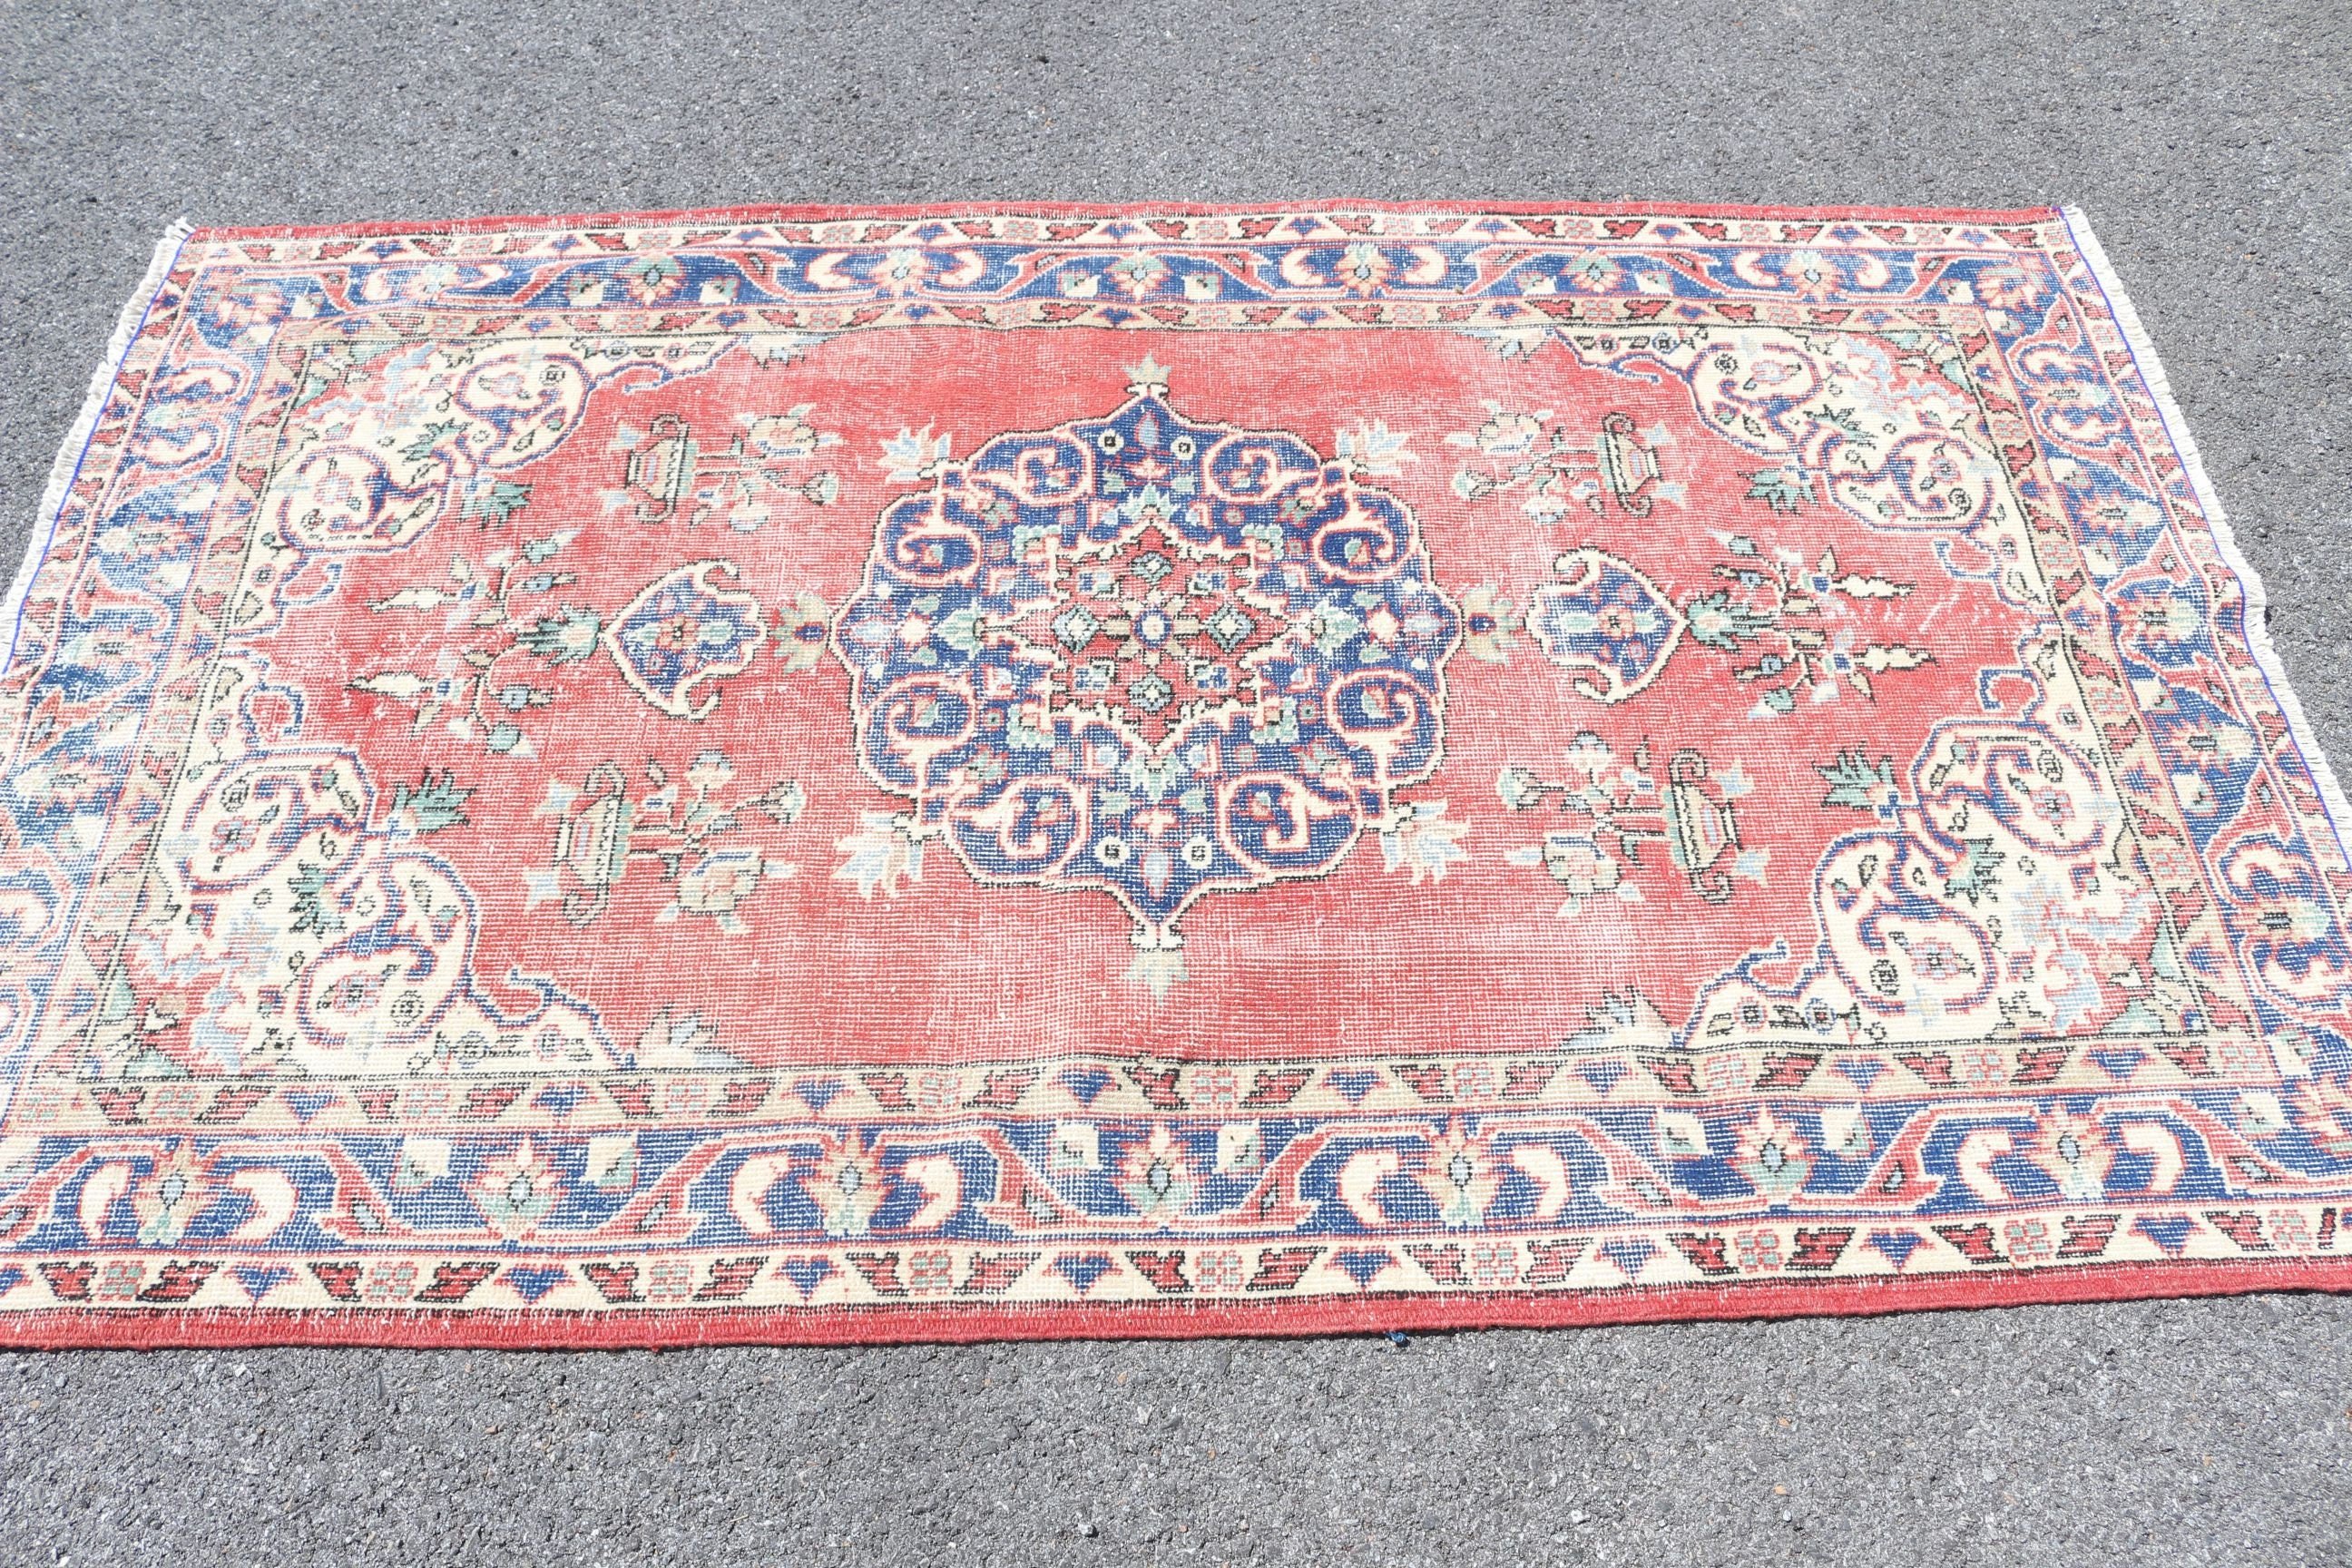 Anatolian Rug, Oushak Rugs, Red Kitchen Rug, Turkish Rug, Vintage Rugs, Aztec Rug, Living Room Rugs, Rugs for Area, 3.9x6.5 ft Area Rug